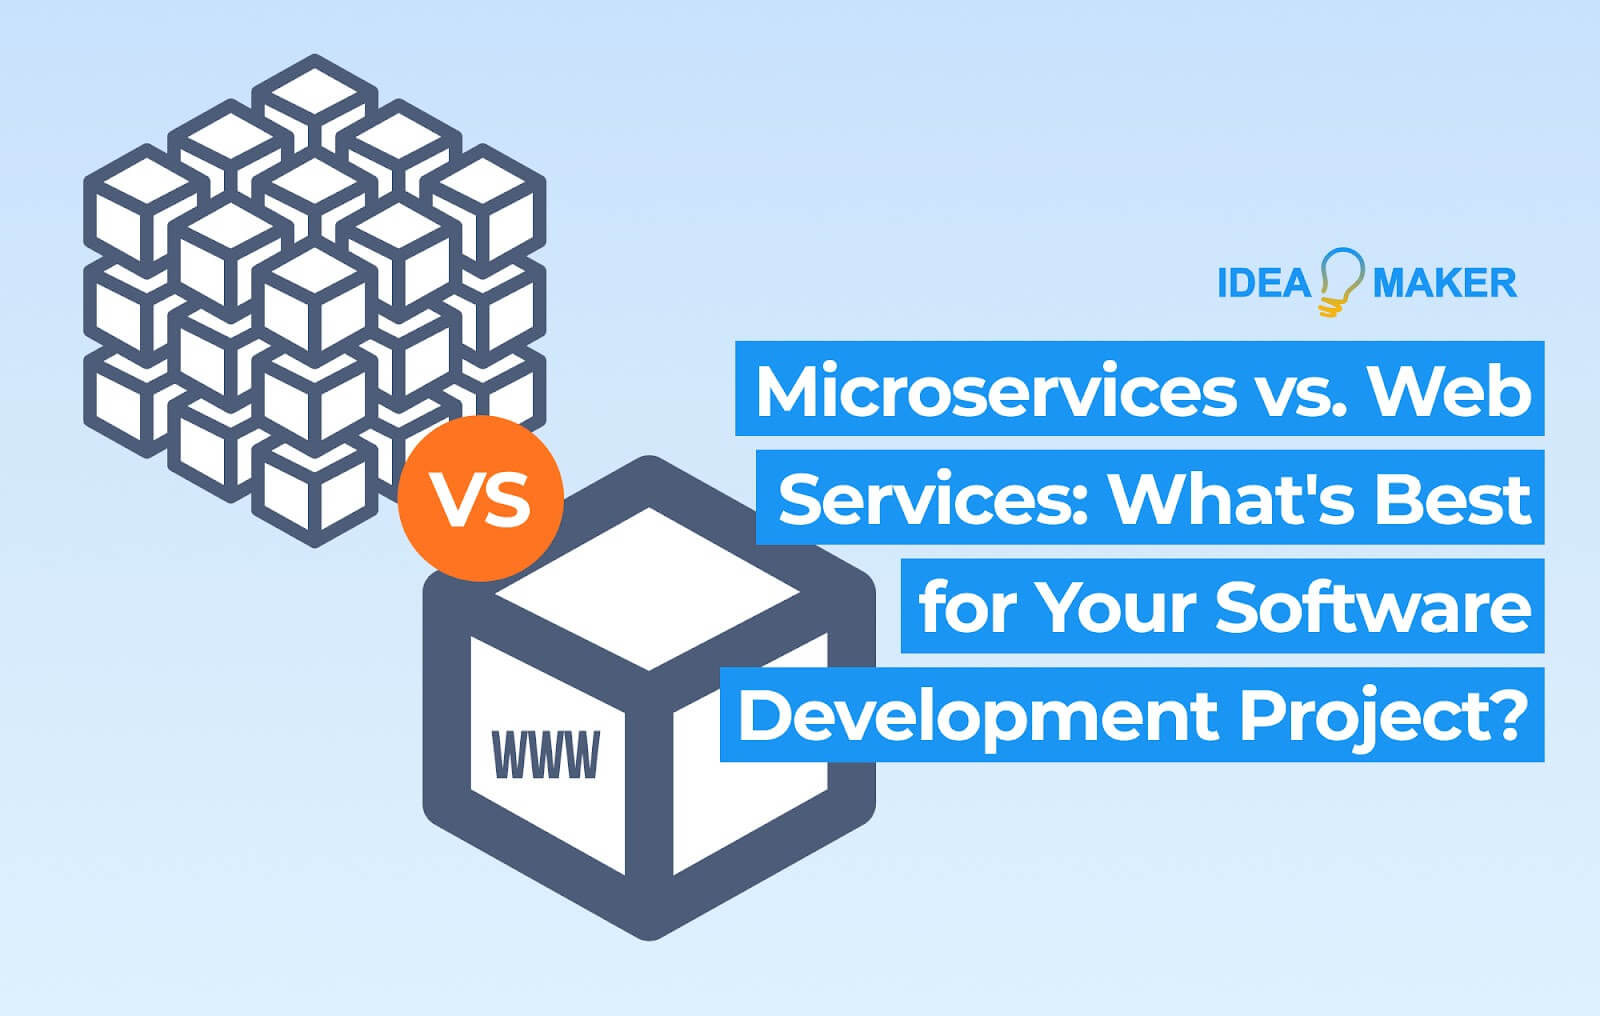 Microservices vs. Web Services: What’s Best for Your Software Development Project?